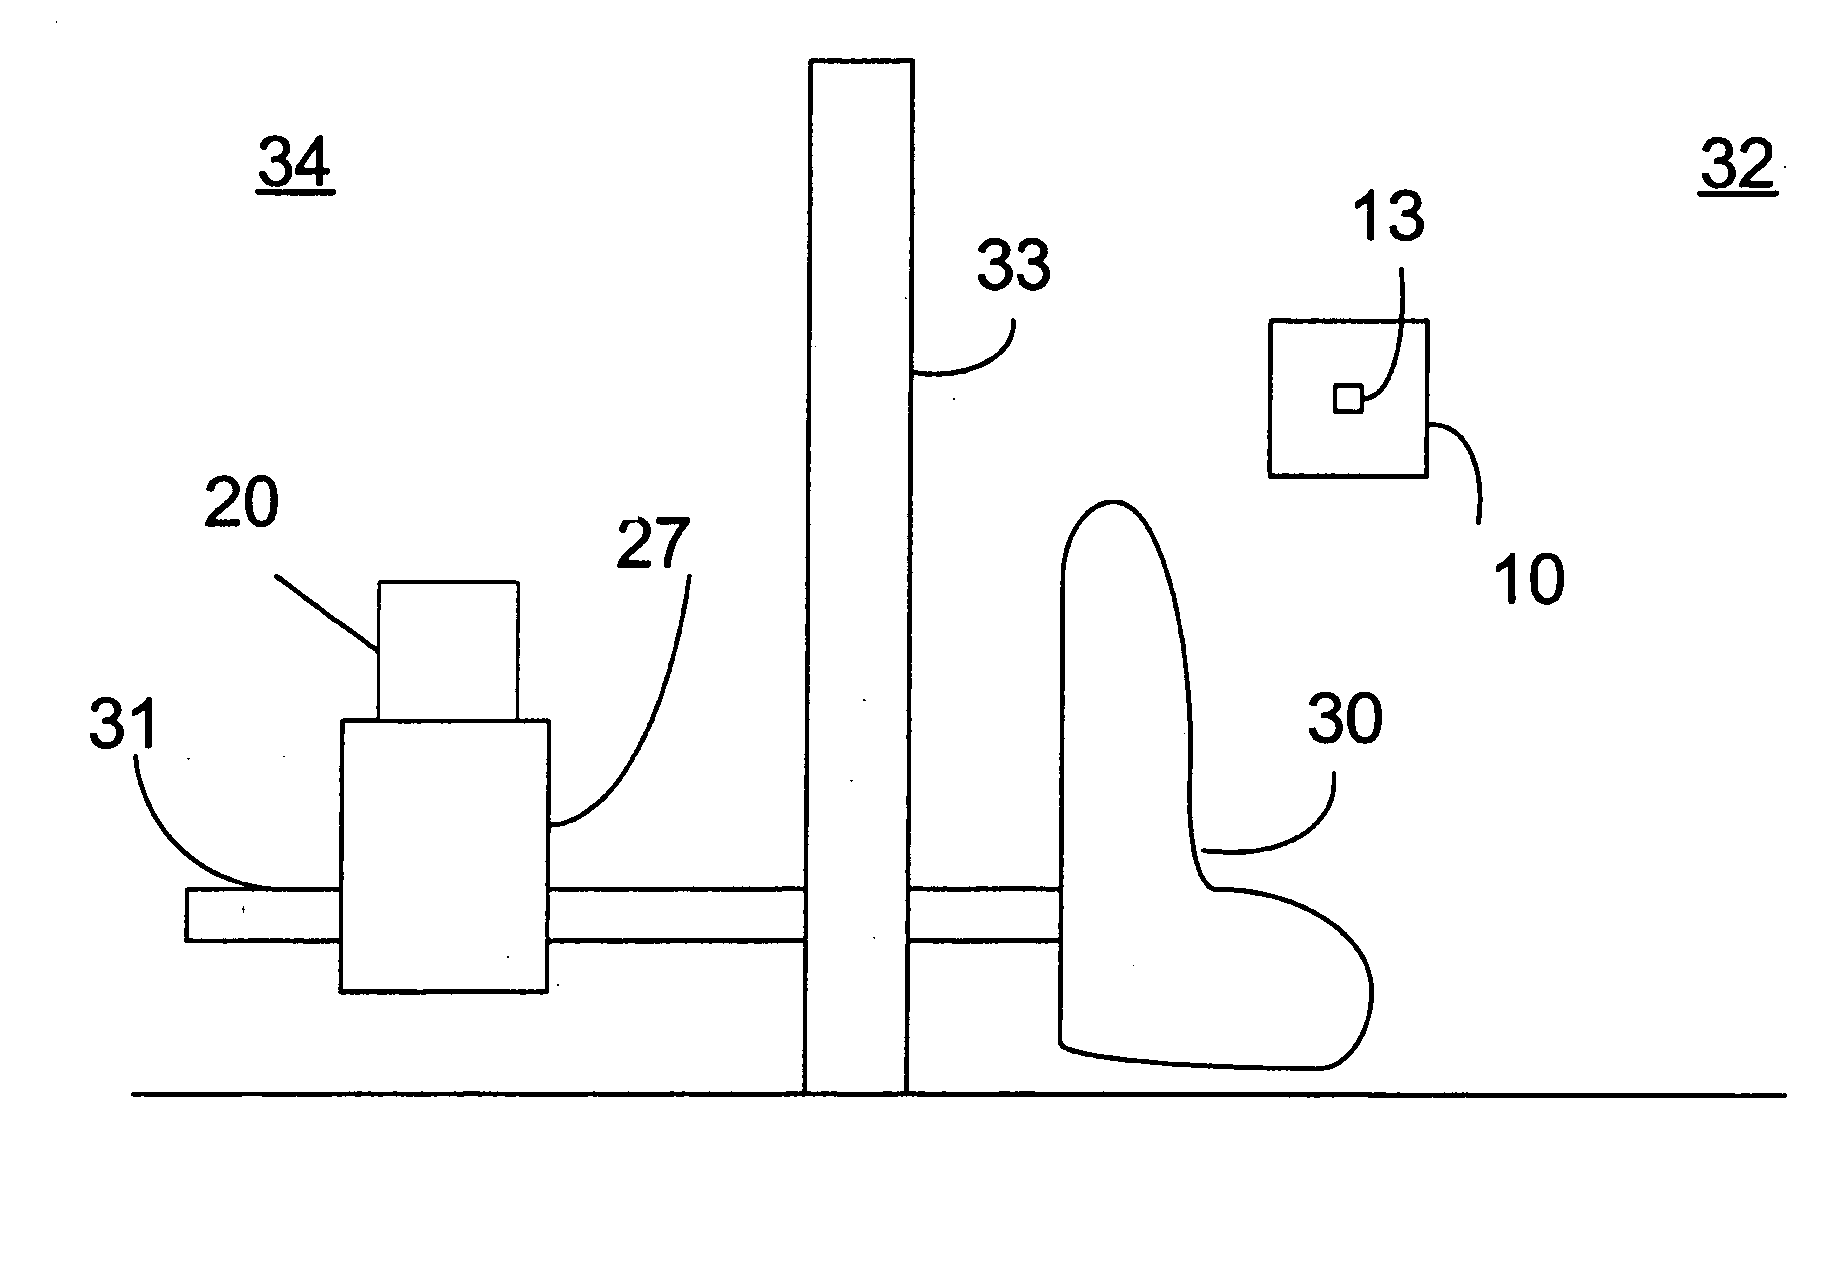 System and method for improved installation and control of concealed plumbing flush valves